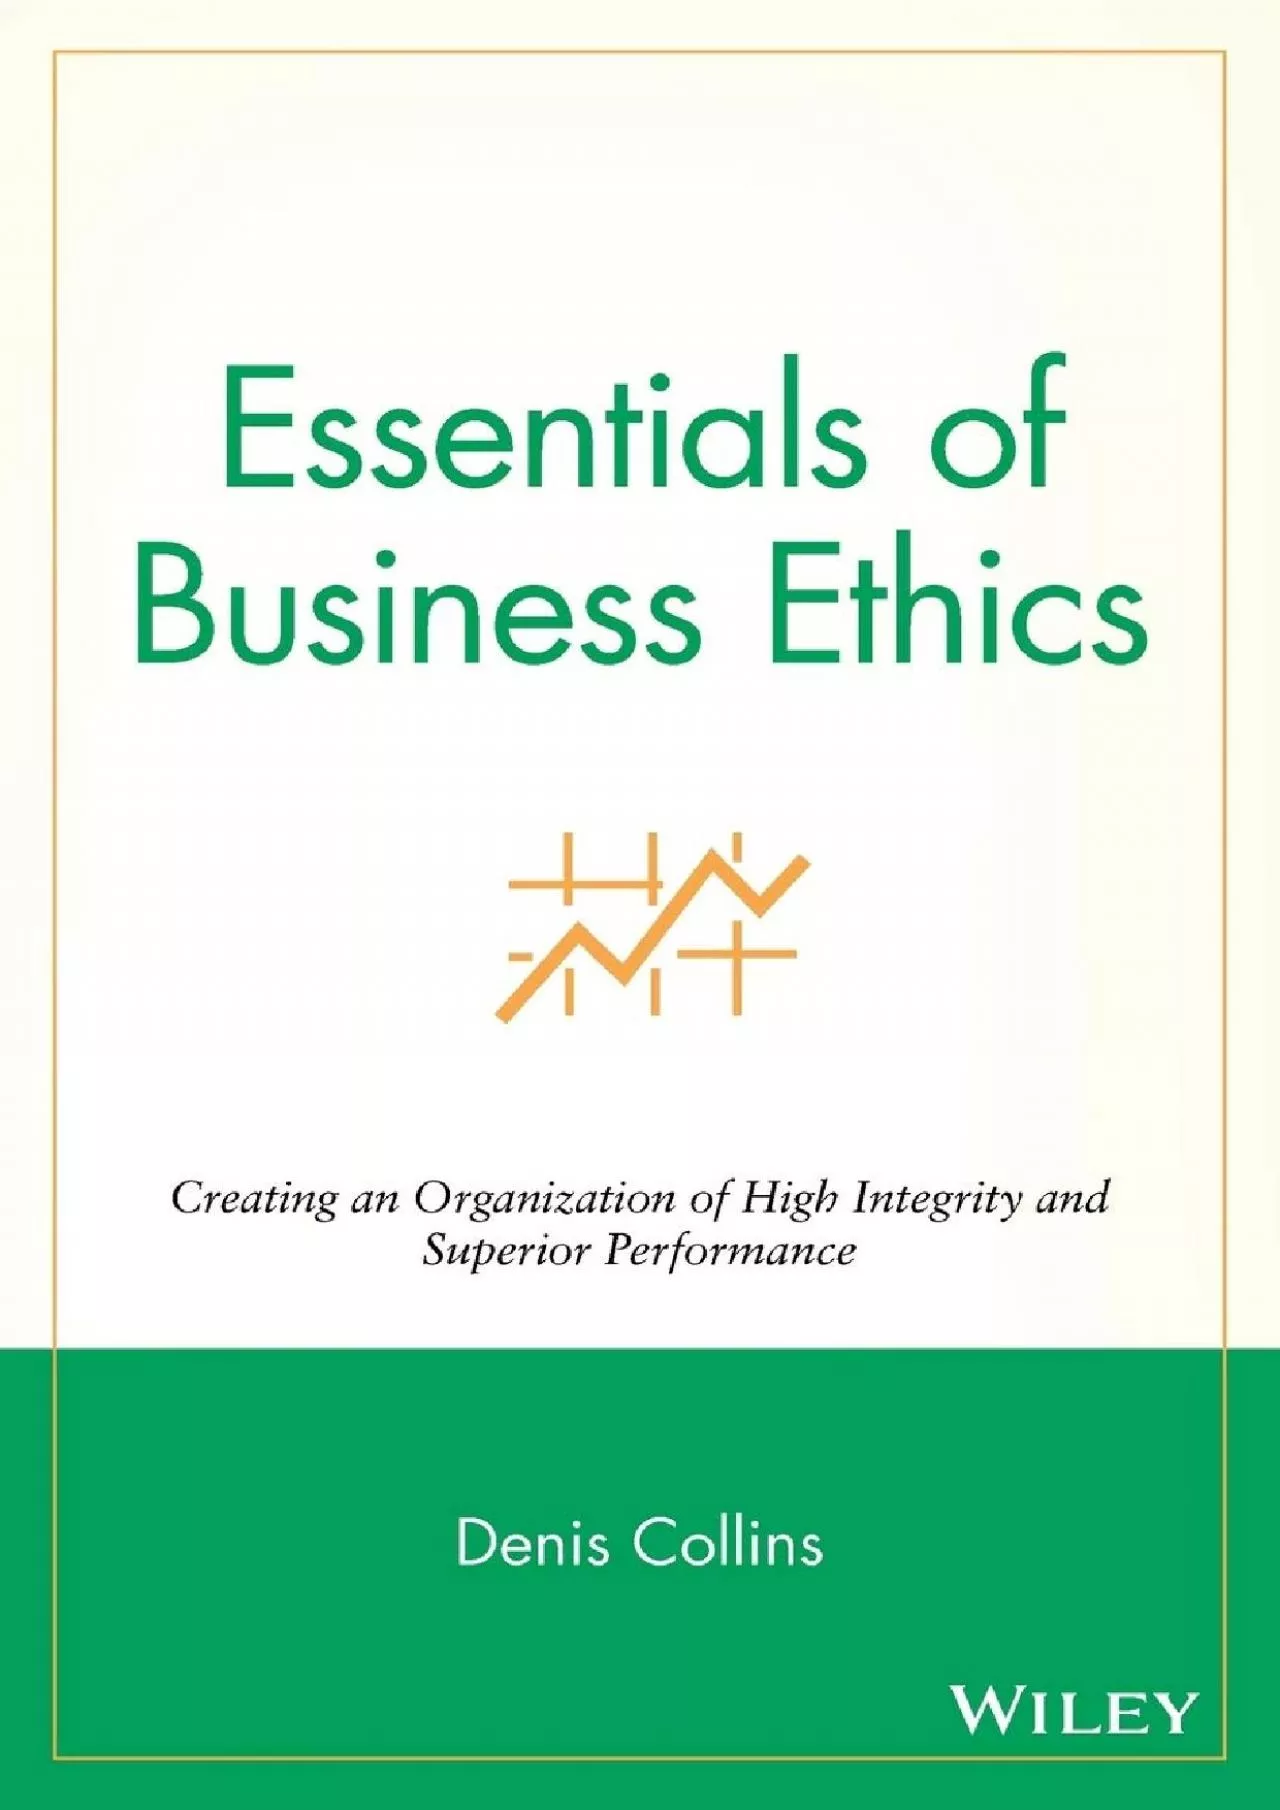 (DOWNLOAD)-Essentials of Business Ethics: Creating an Organization of High Integrity and